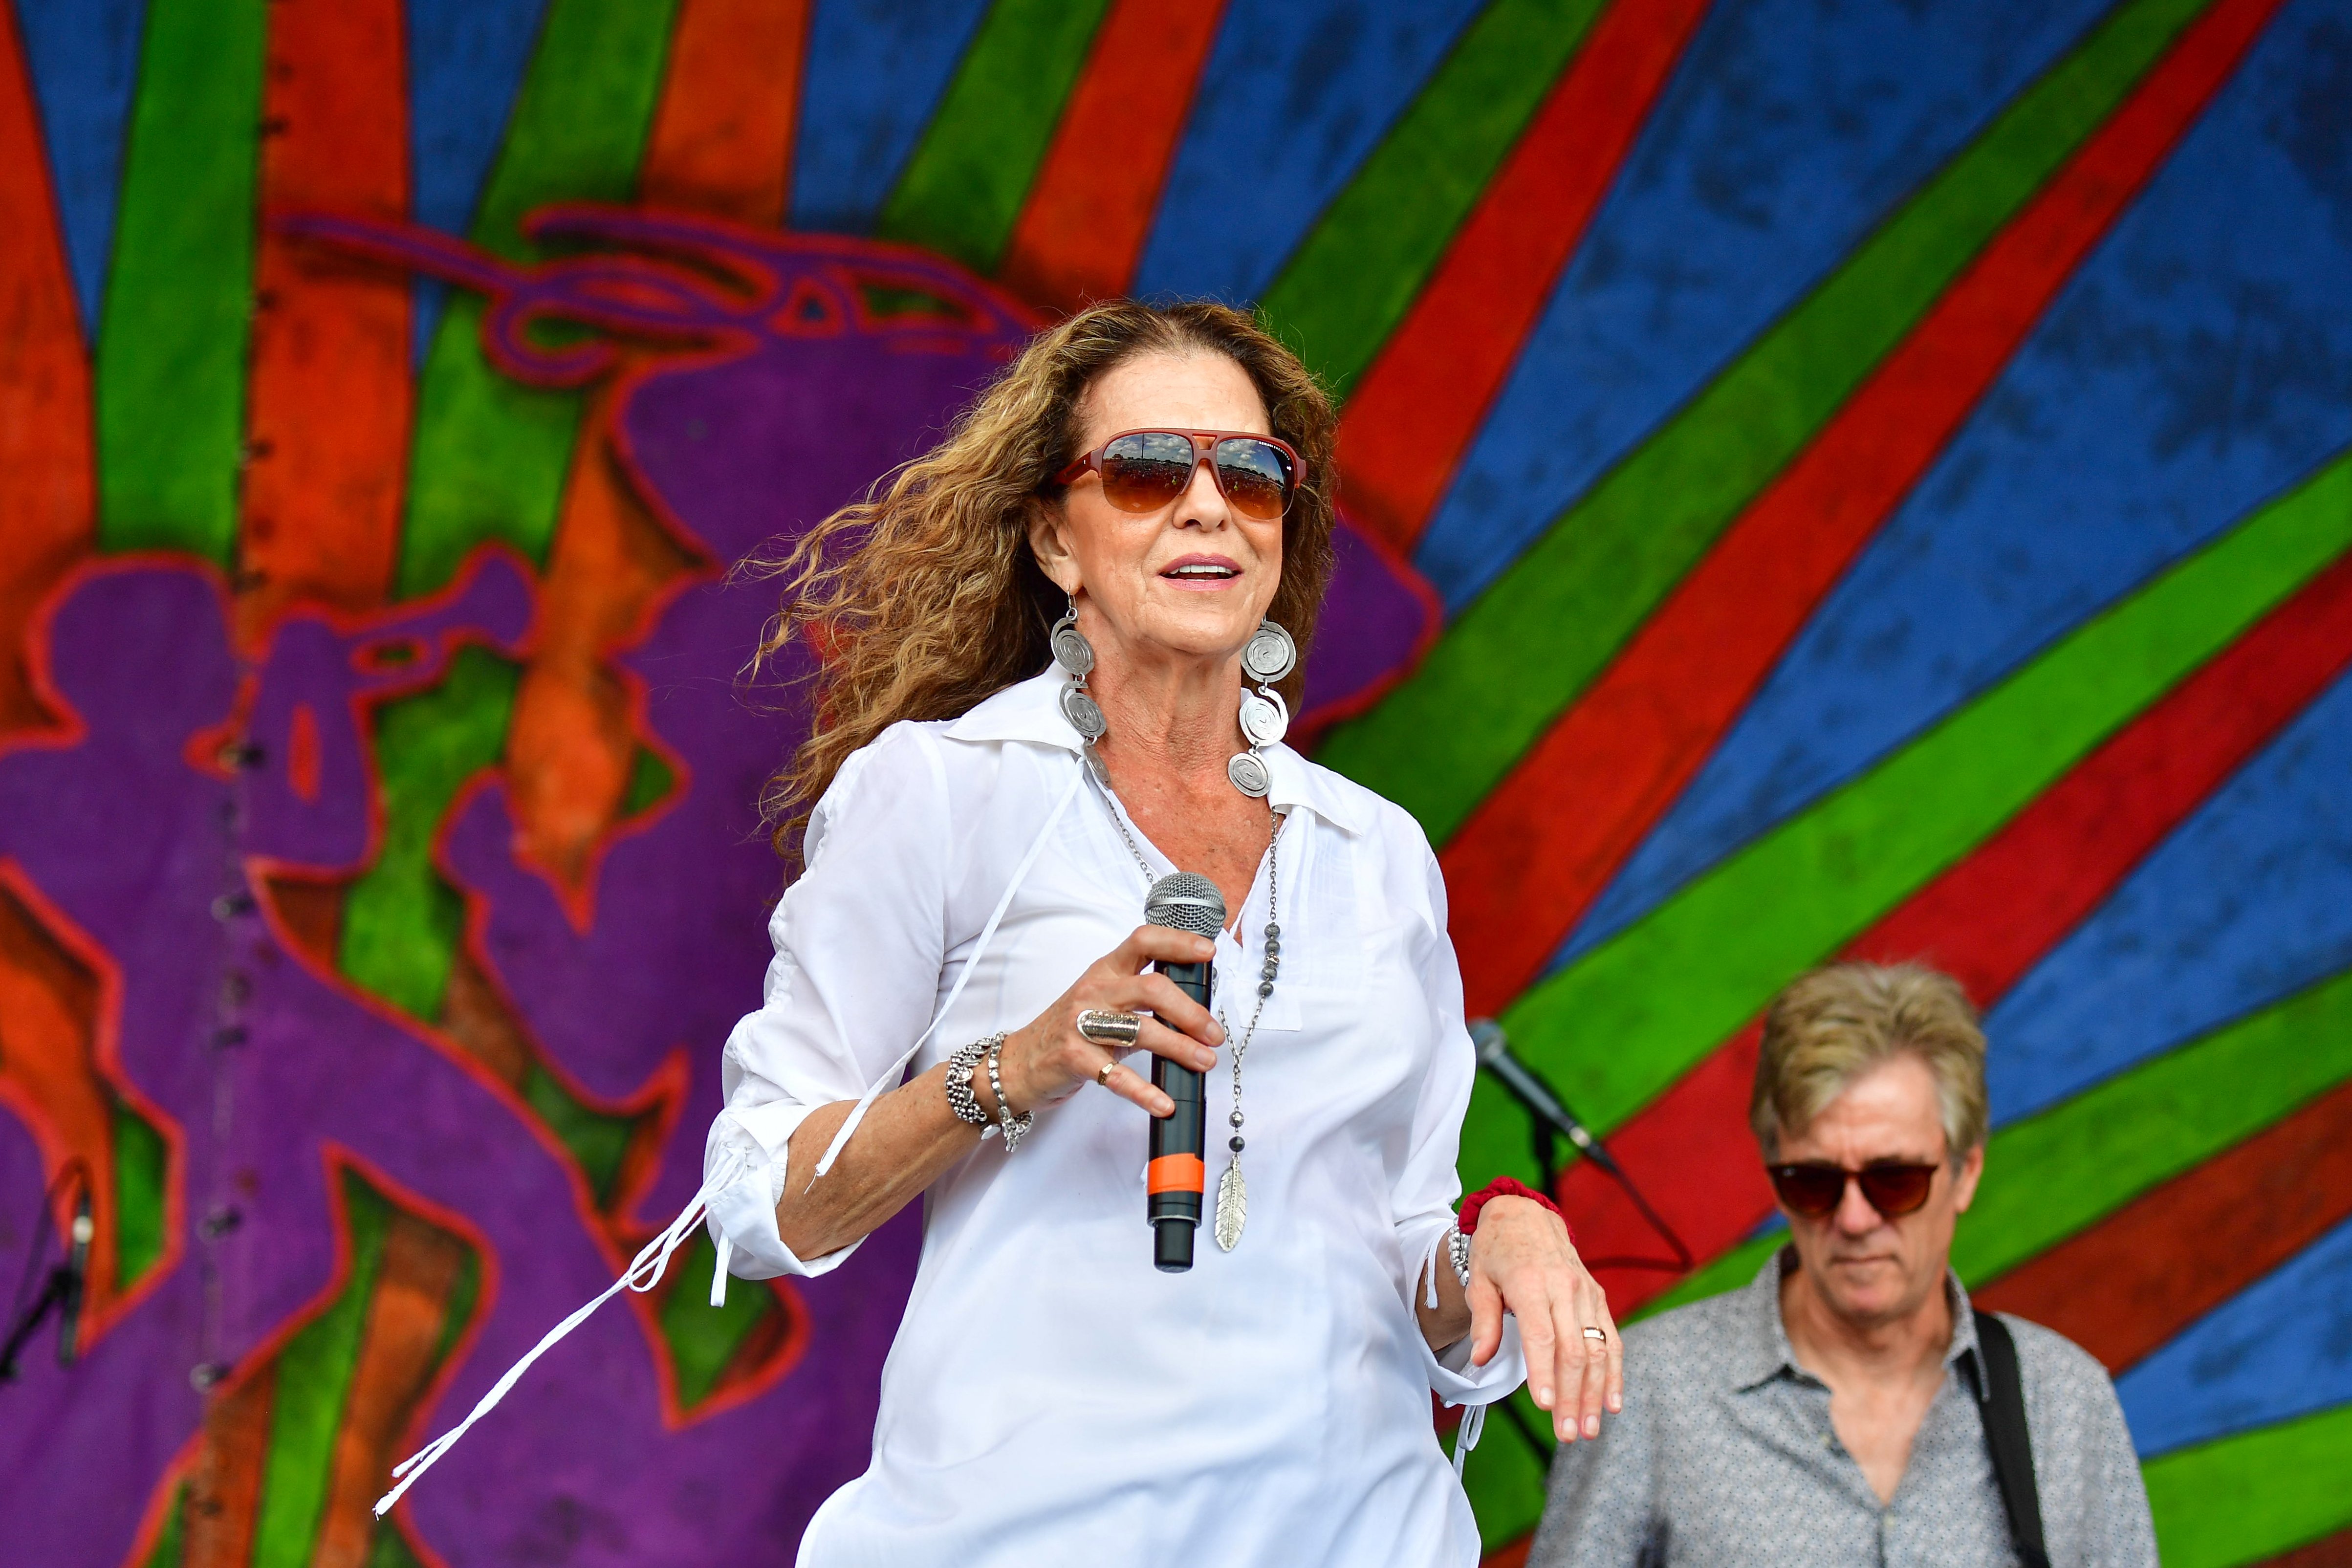 Rita Coolidge performs during the 2019 New Orleans Jazz & Heritage Festival 50th Anniversary | Photo: Getty Images